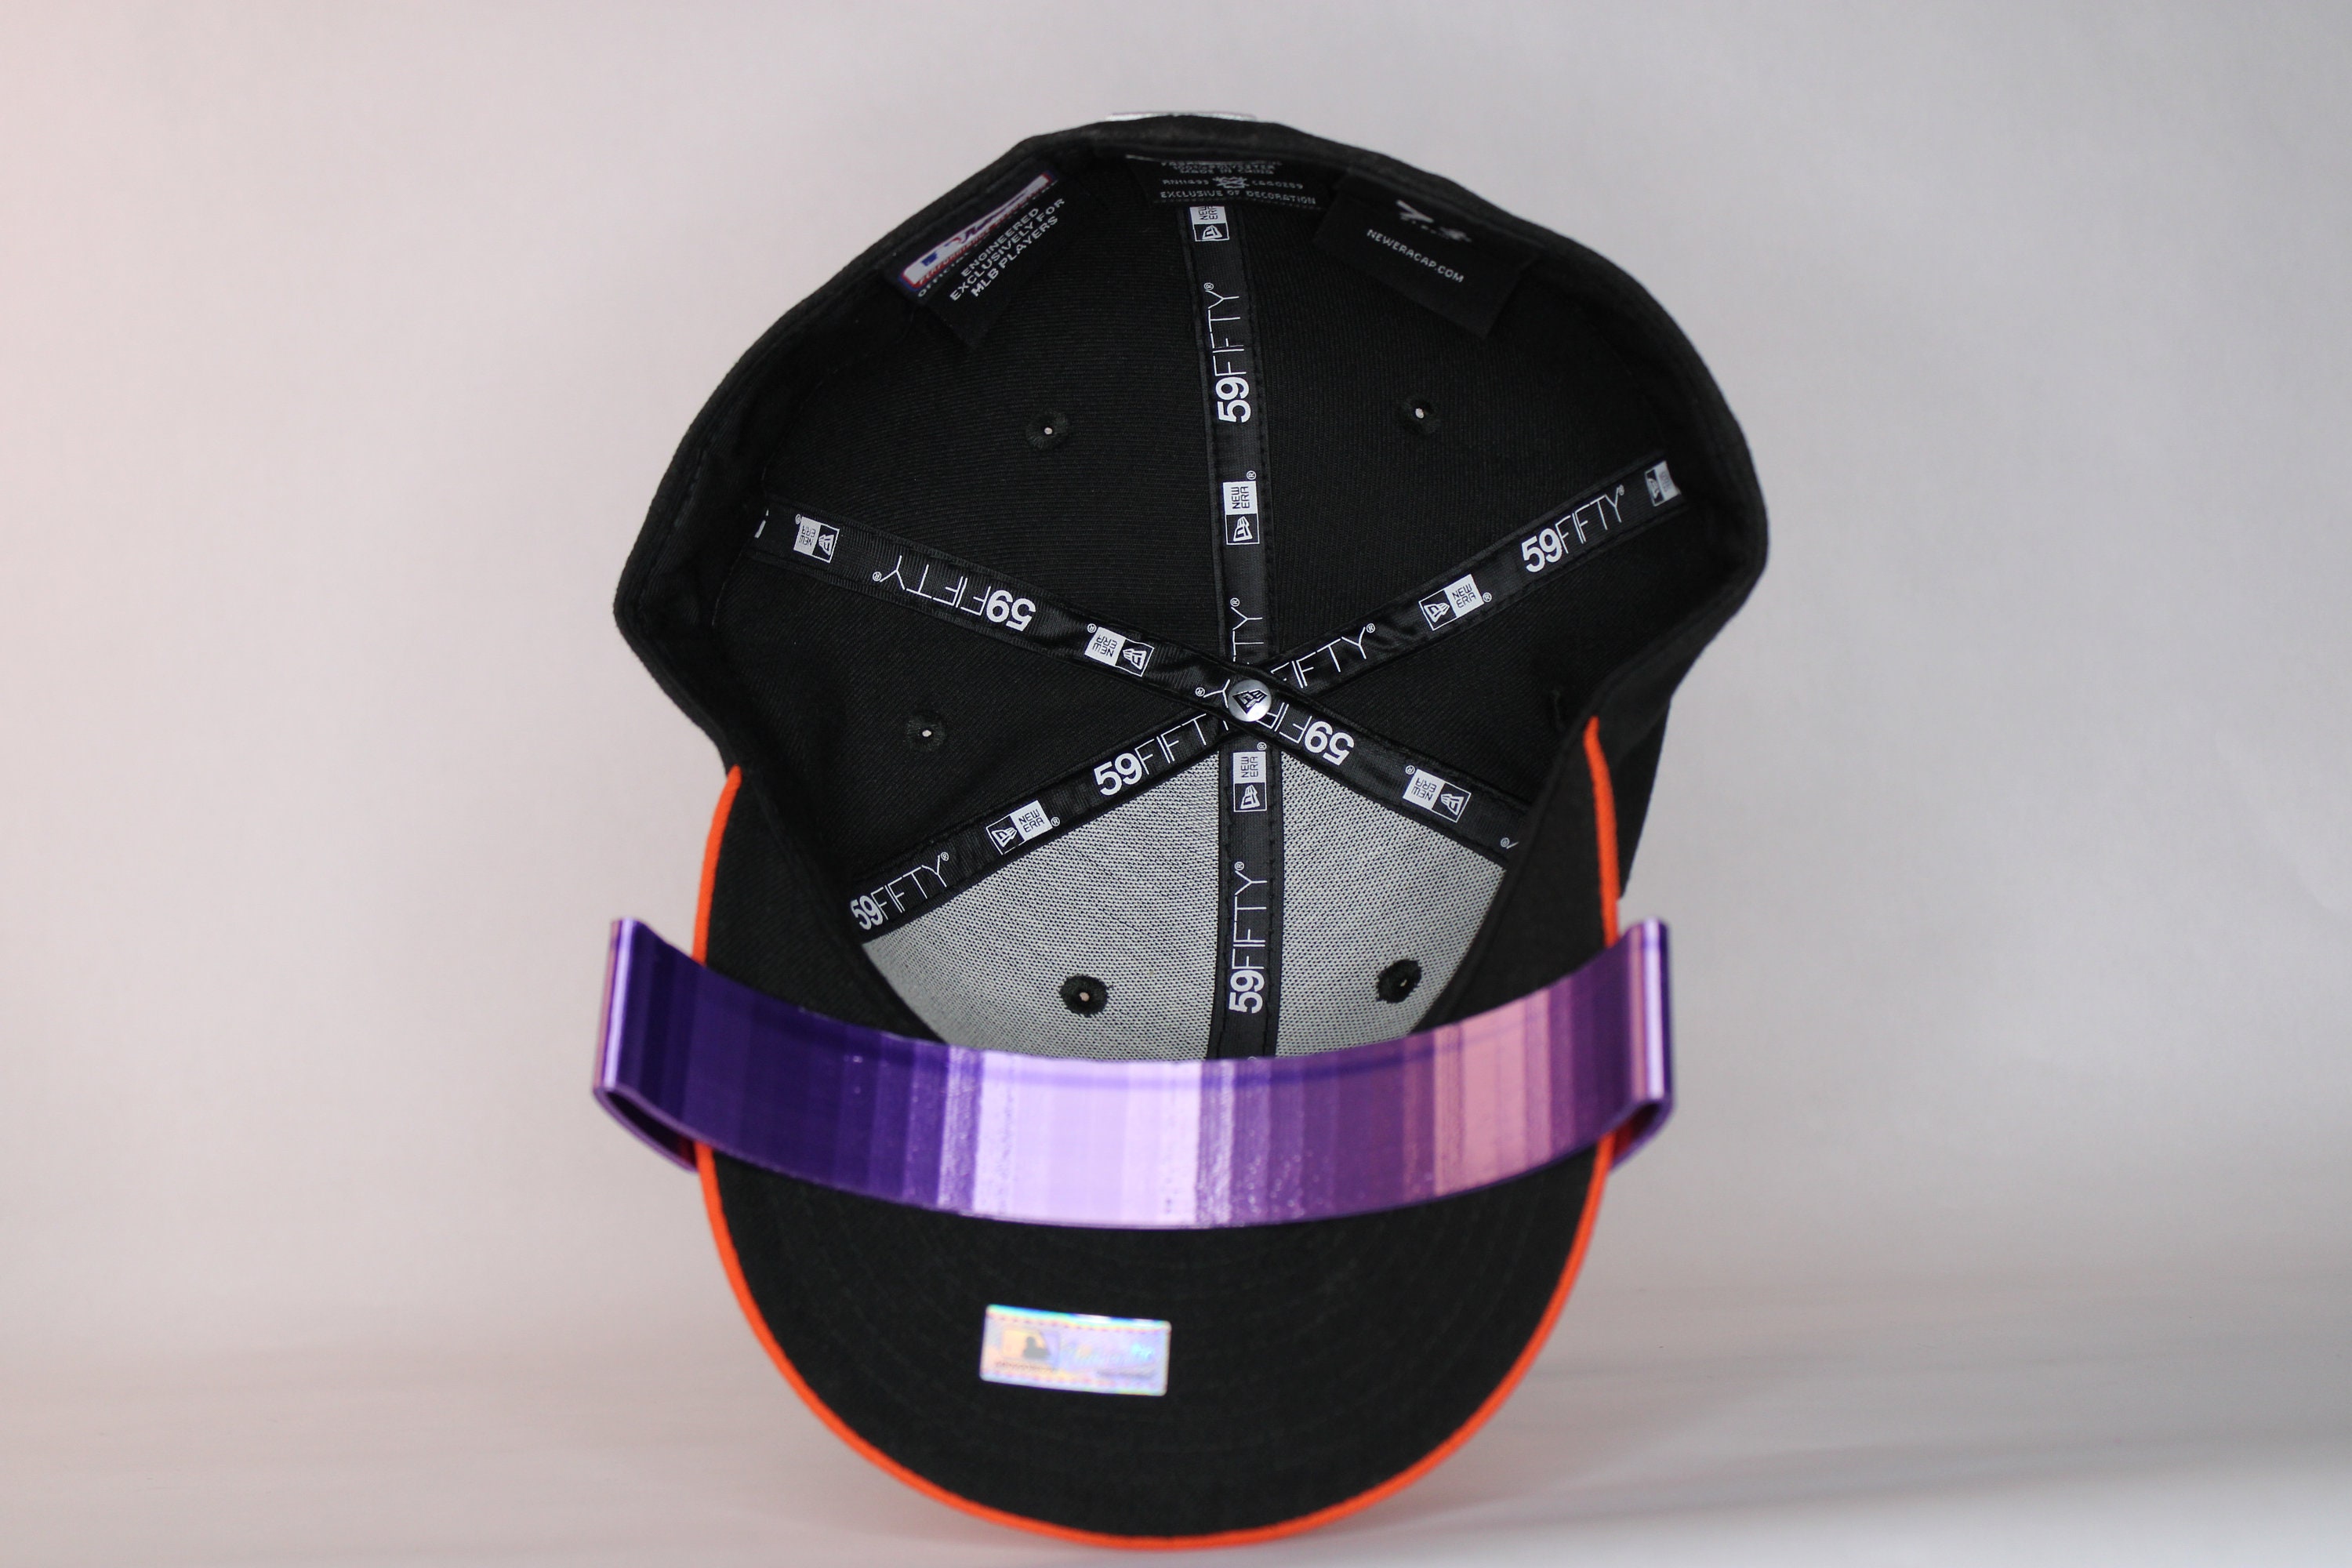 hat bill shaper, hat bill shaper Suppliers and Manufacturers at